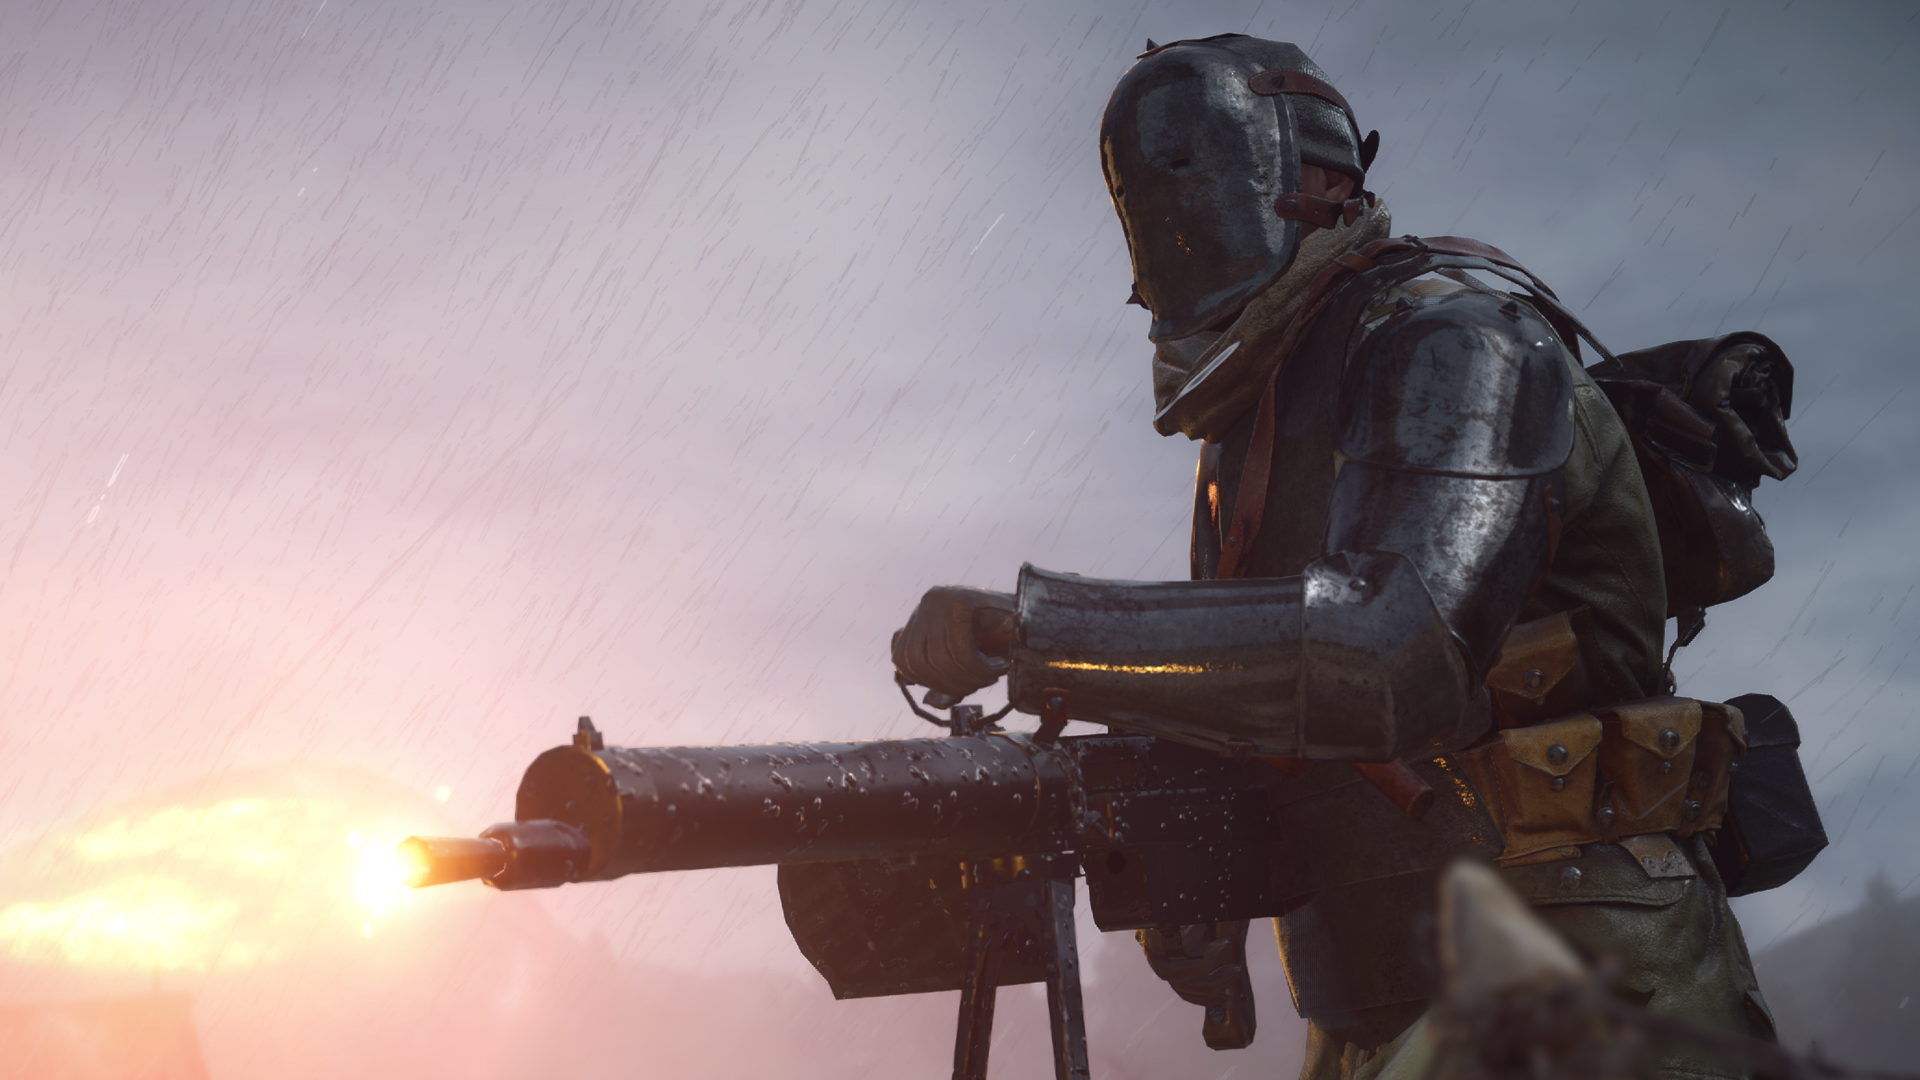 New Details On Battlefield 1's May Update Coming Tomorrow In Livestream -  GameSpot